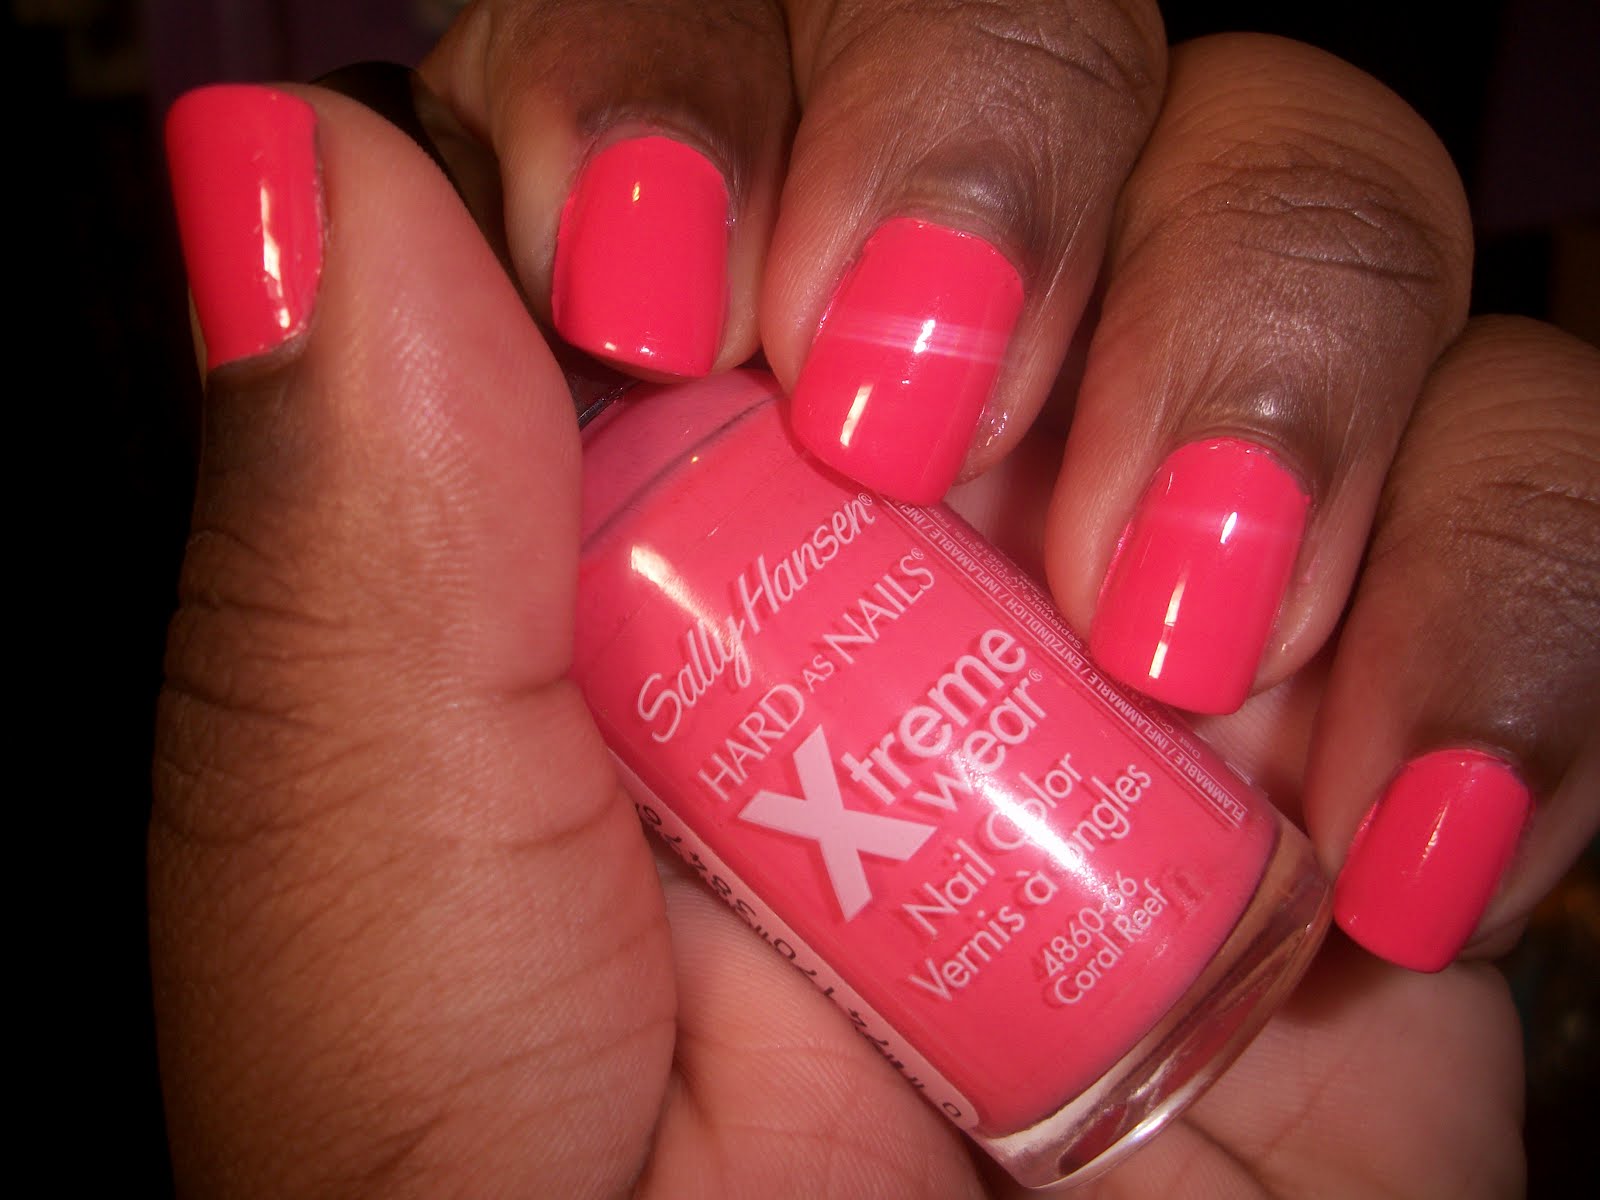 2. Essie Nail Polish in "Coral Reef" - wide 2